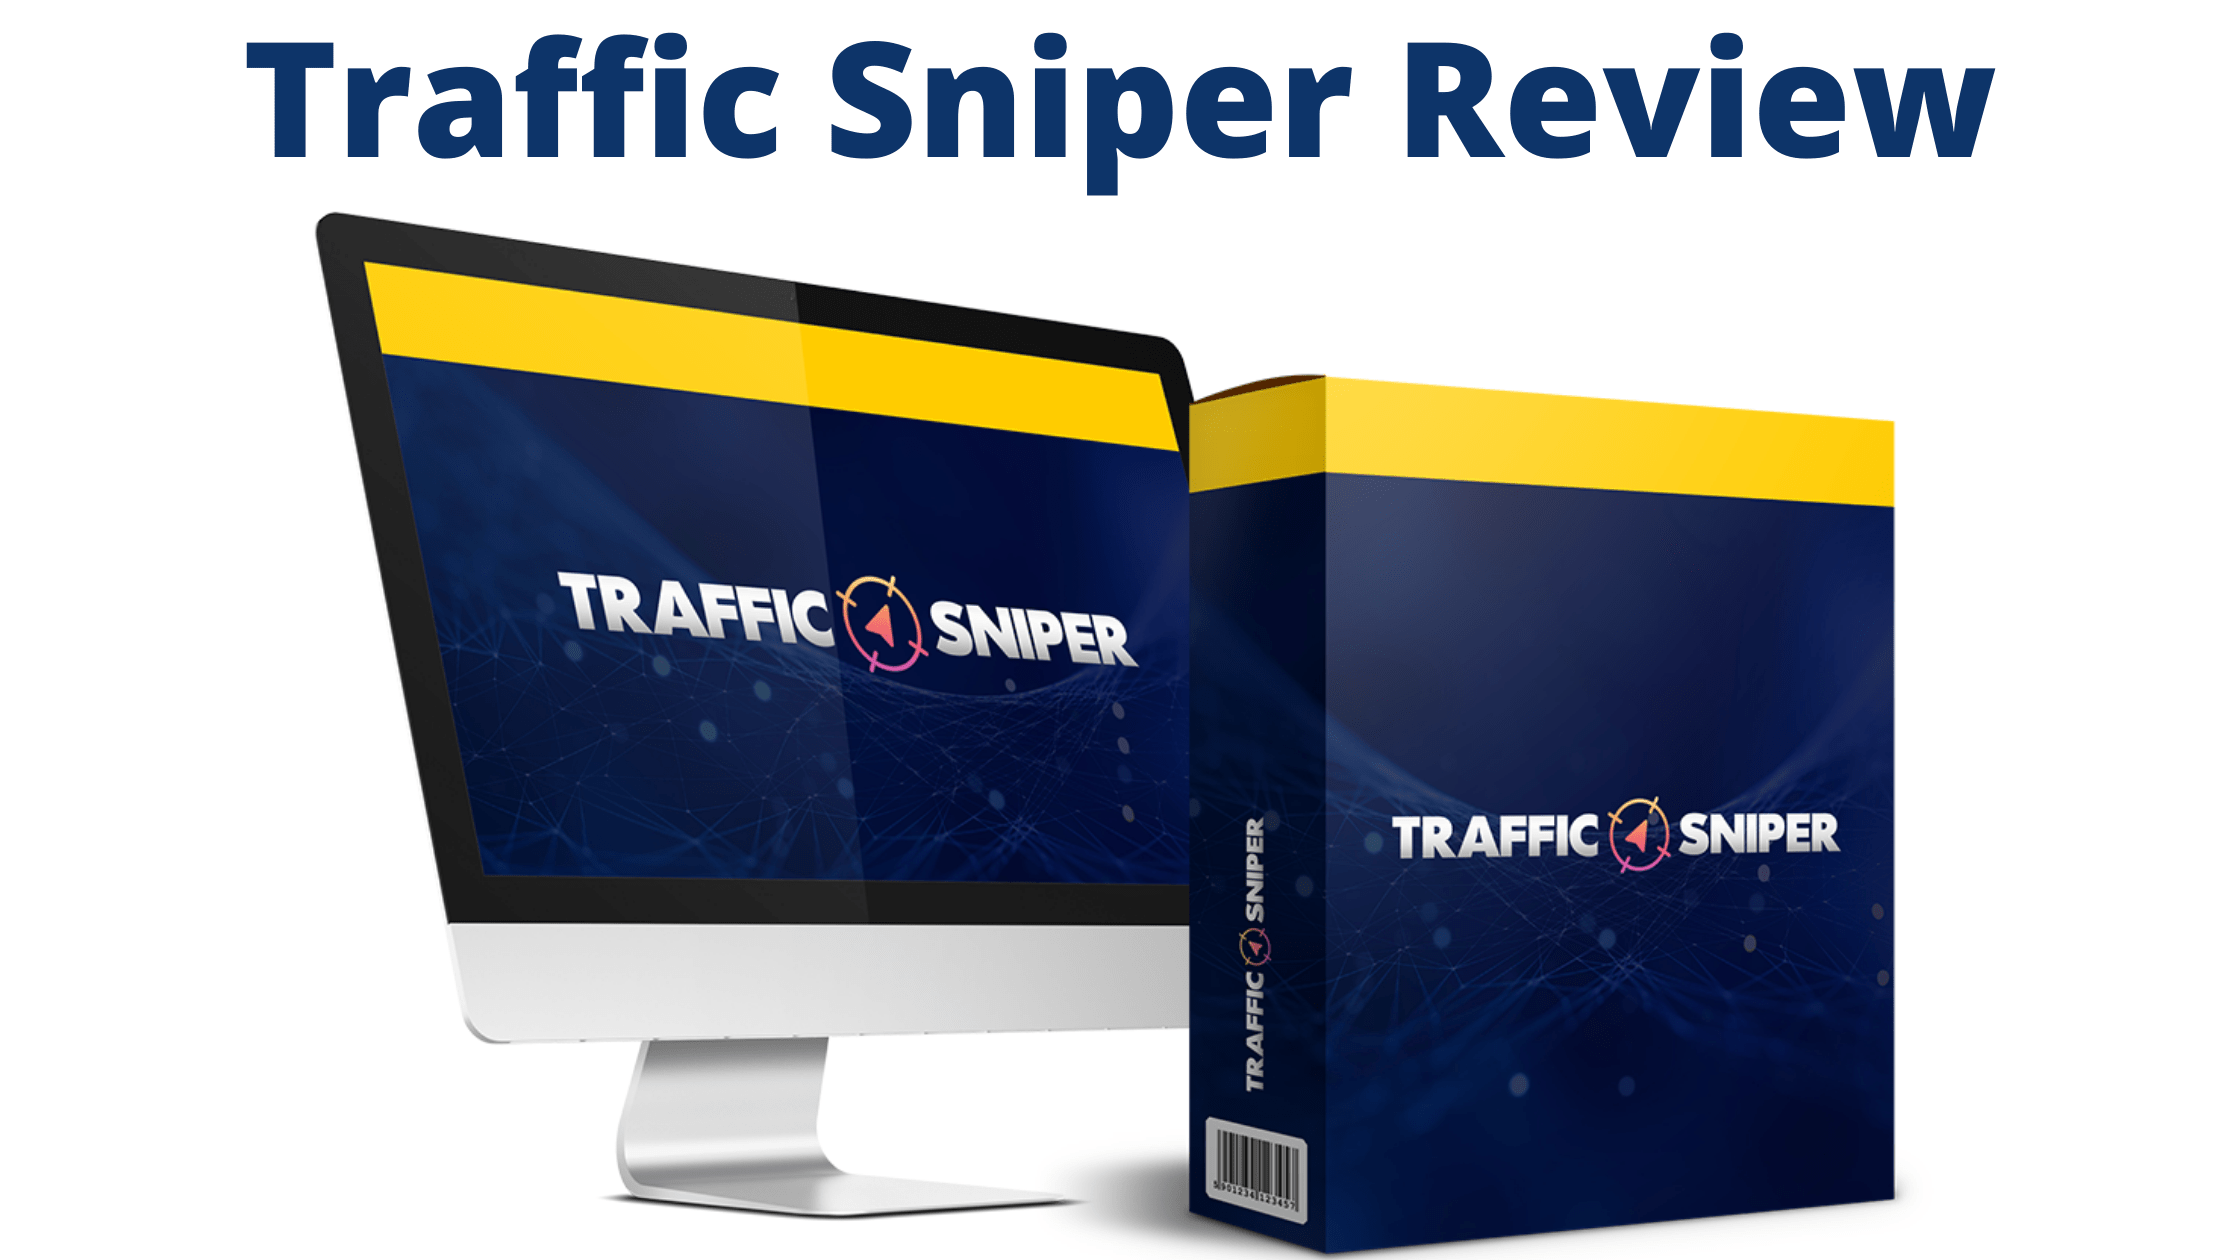 Traffic Sniper Review